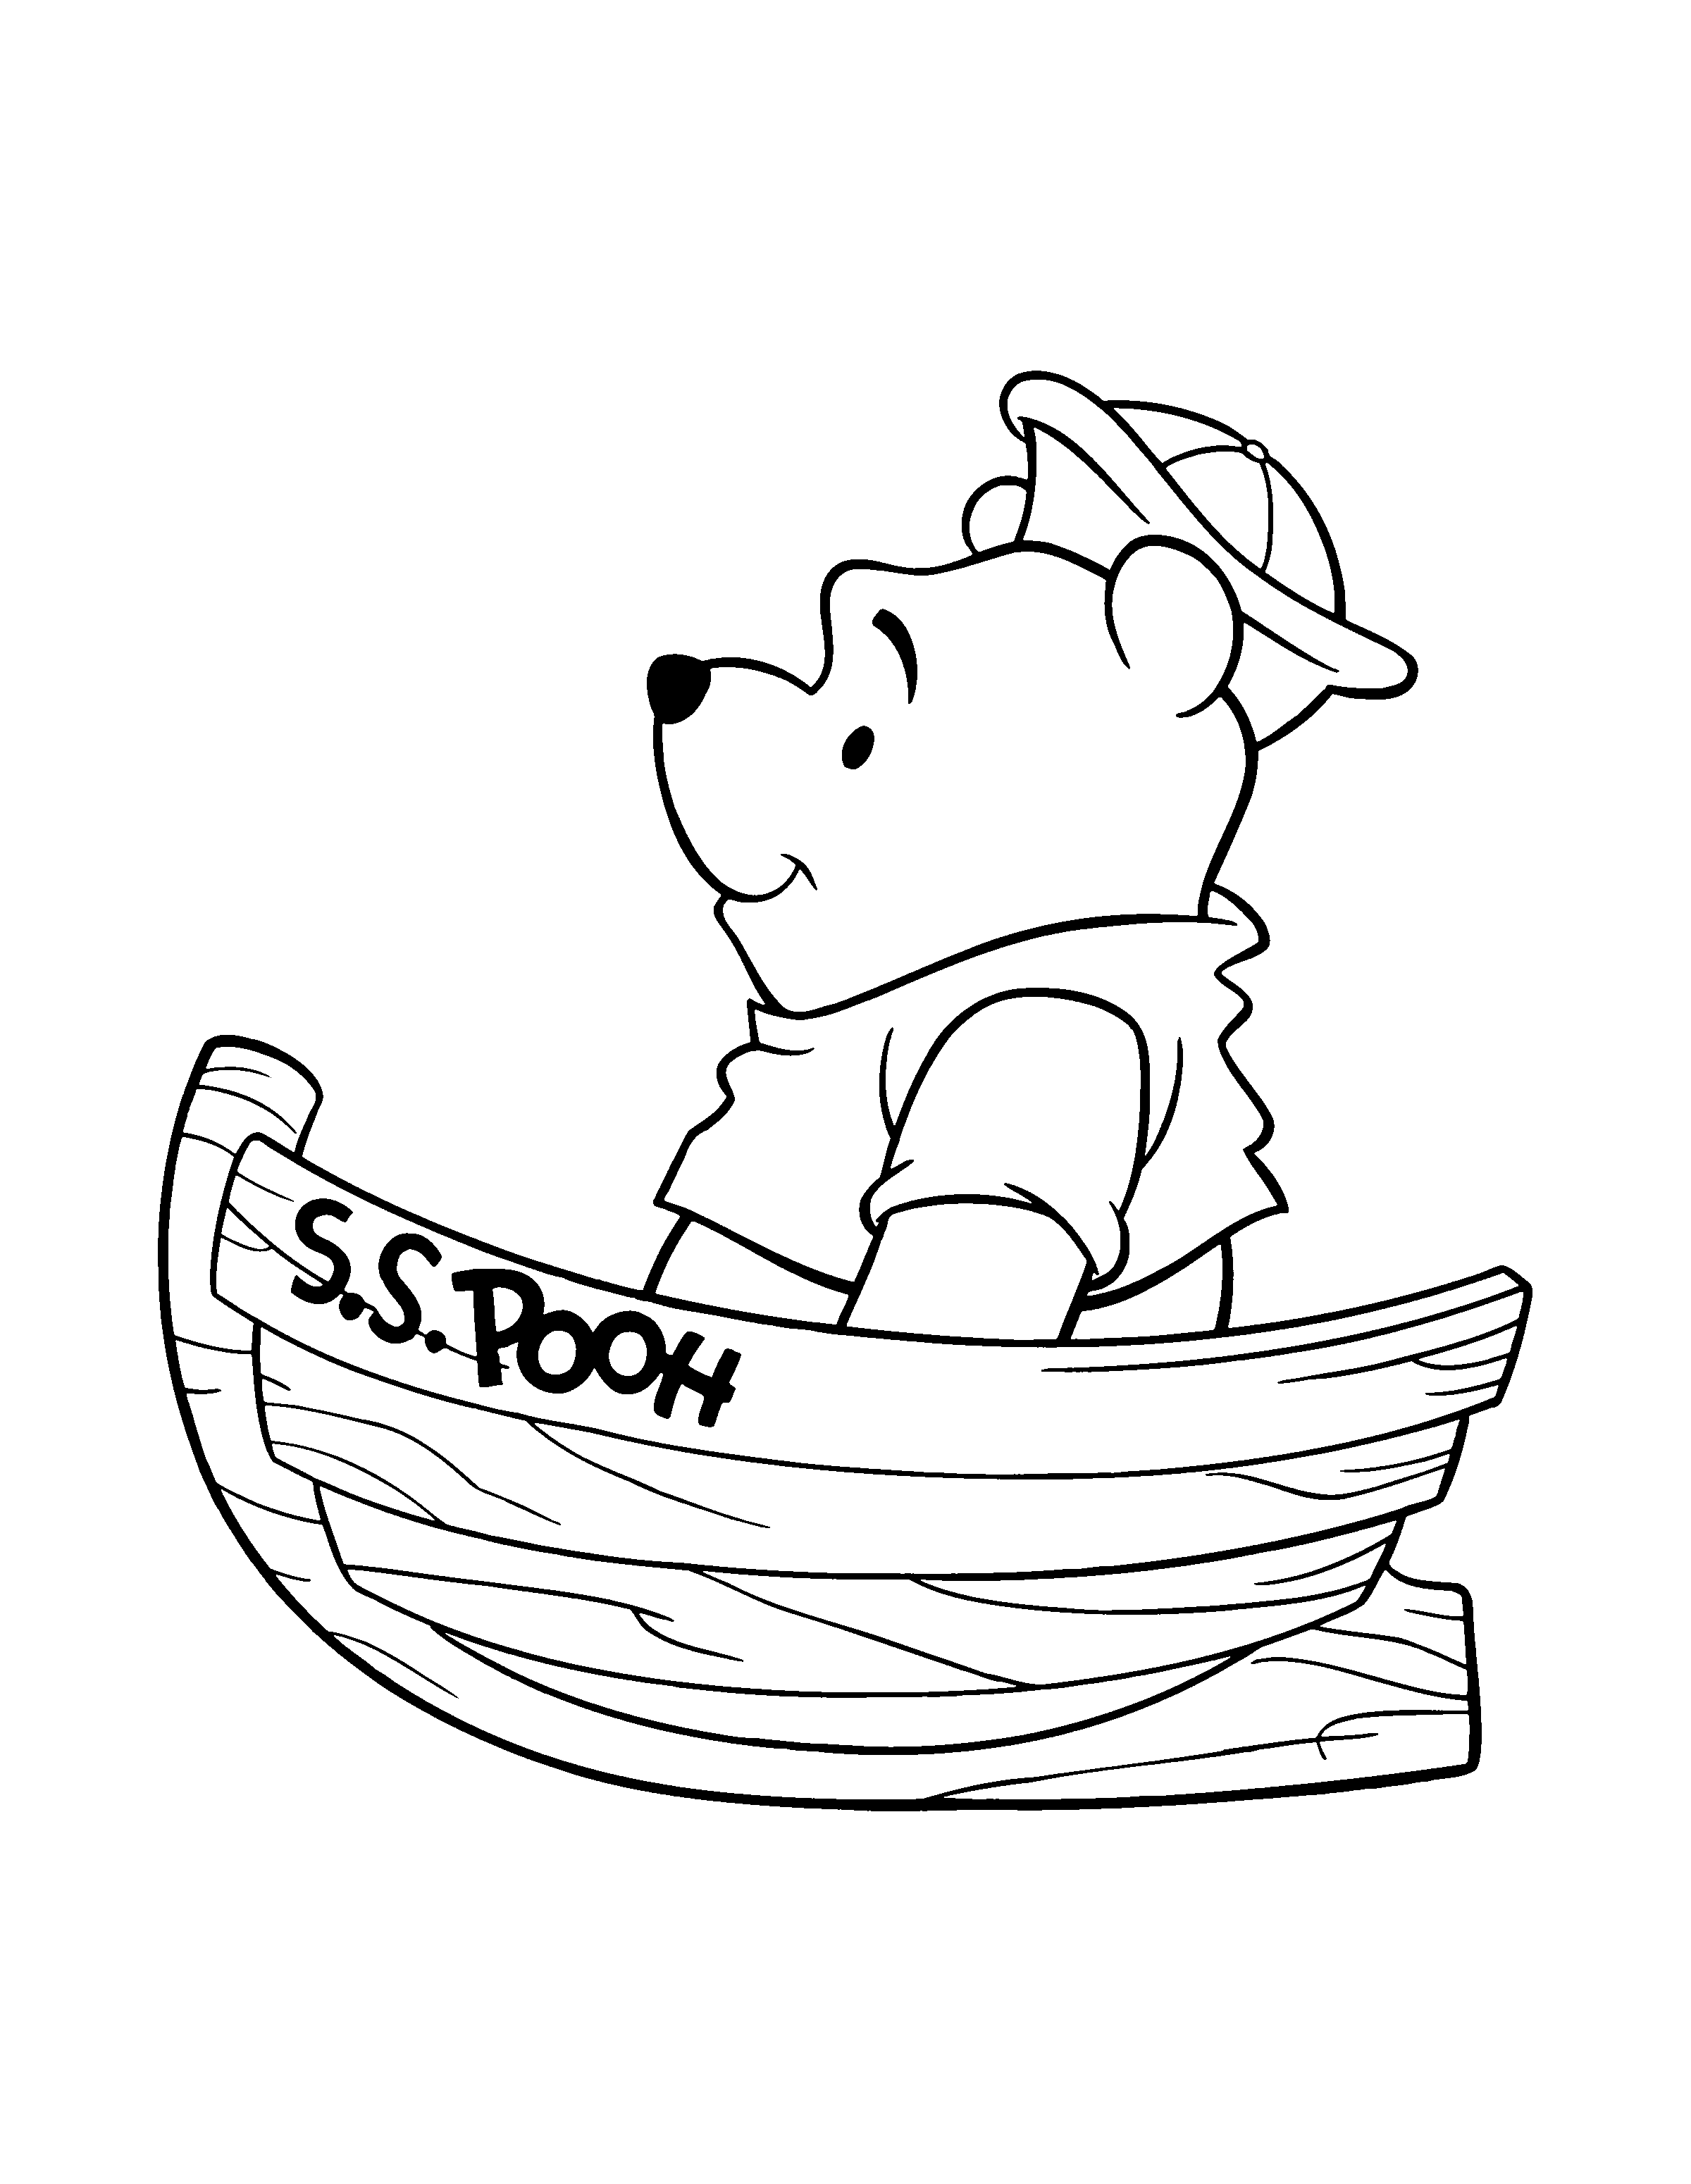 animated-coloring-pages-winnie-the-pooh-image-0004